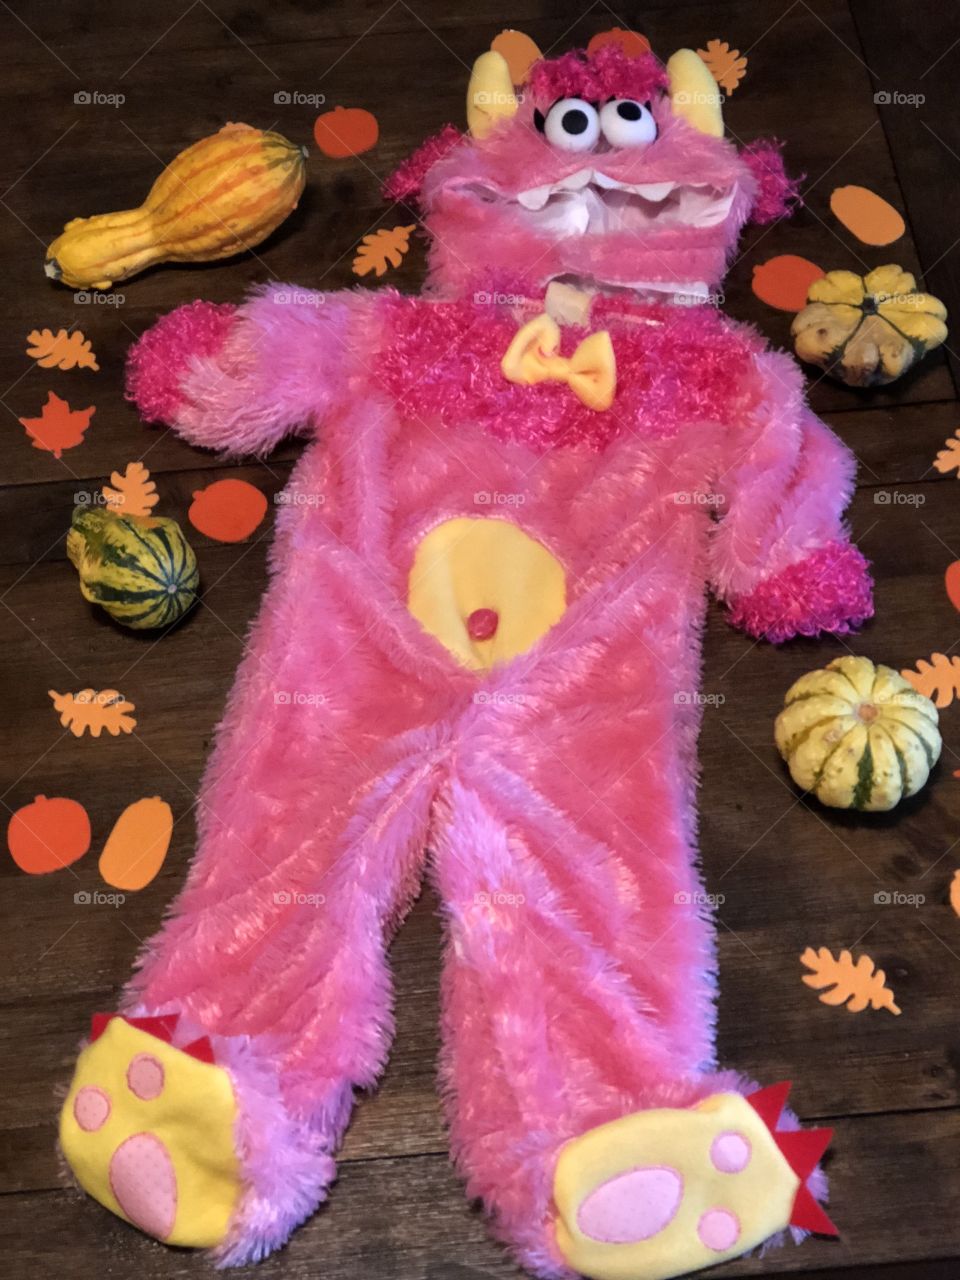 Fall themed background surrounds a toddler sized pink monster Halloween costume